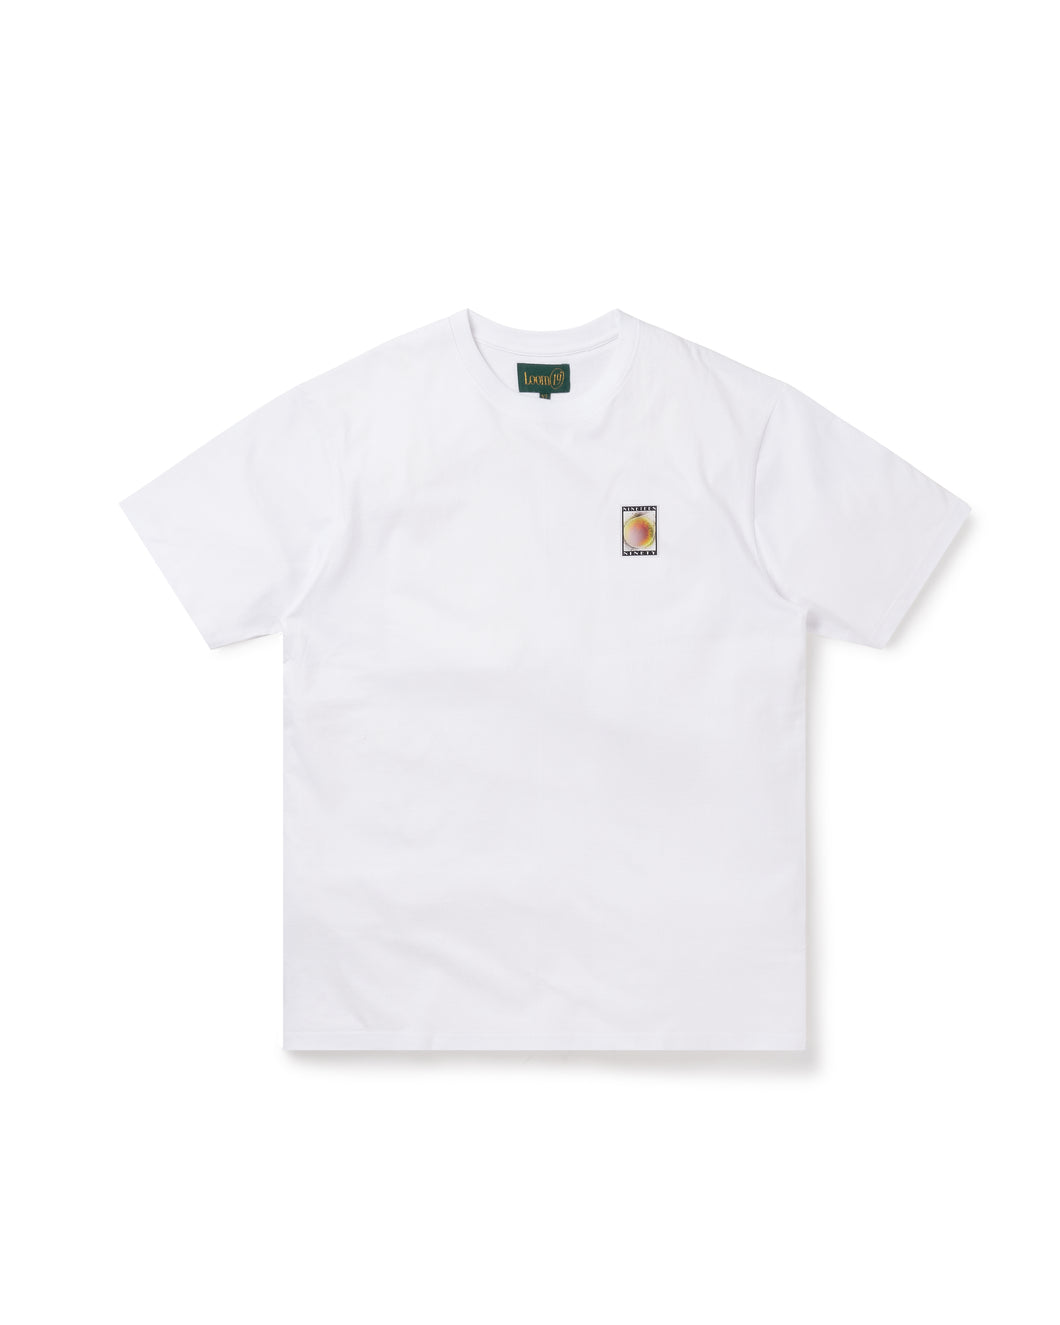 Mid 90s Club × Loom19 1990 For the love of golf Tee